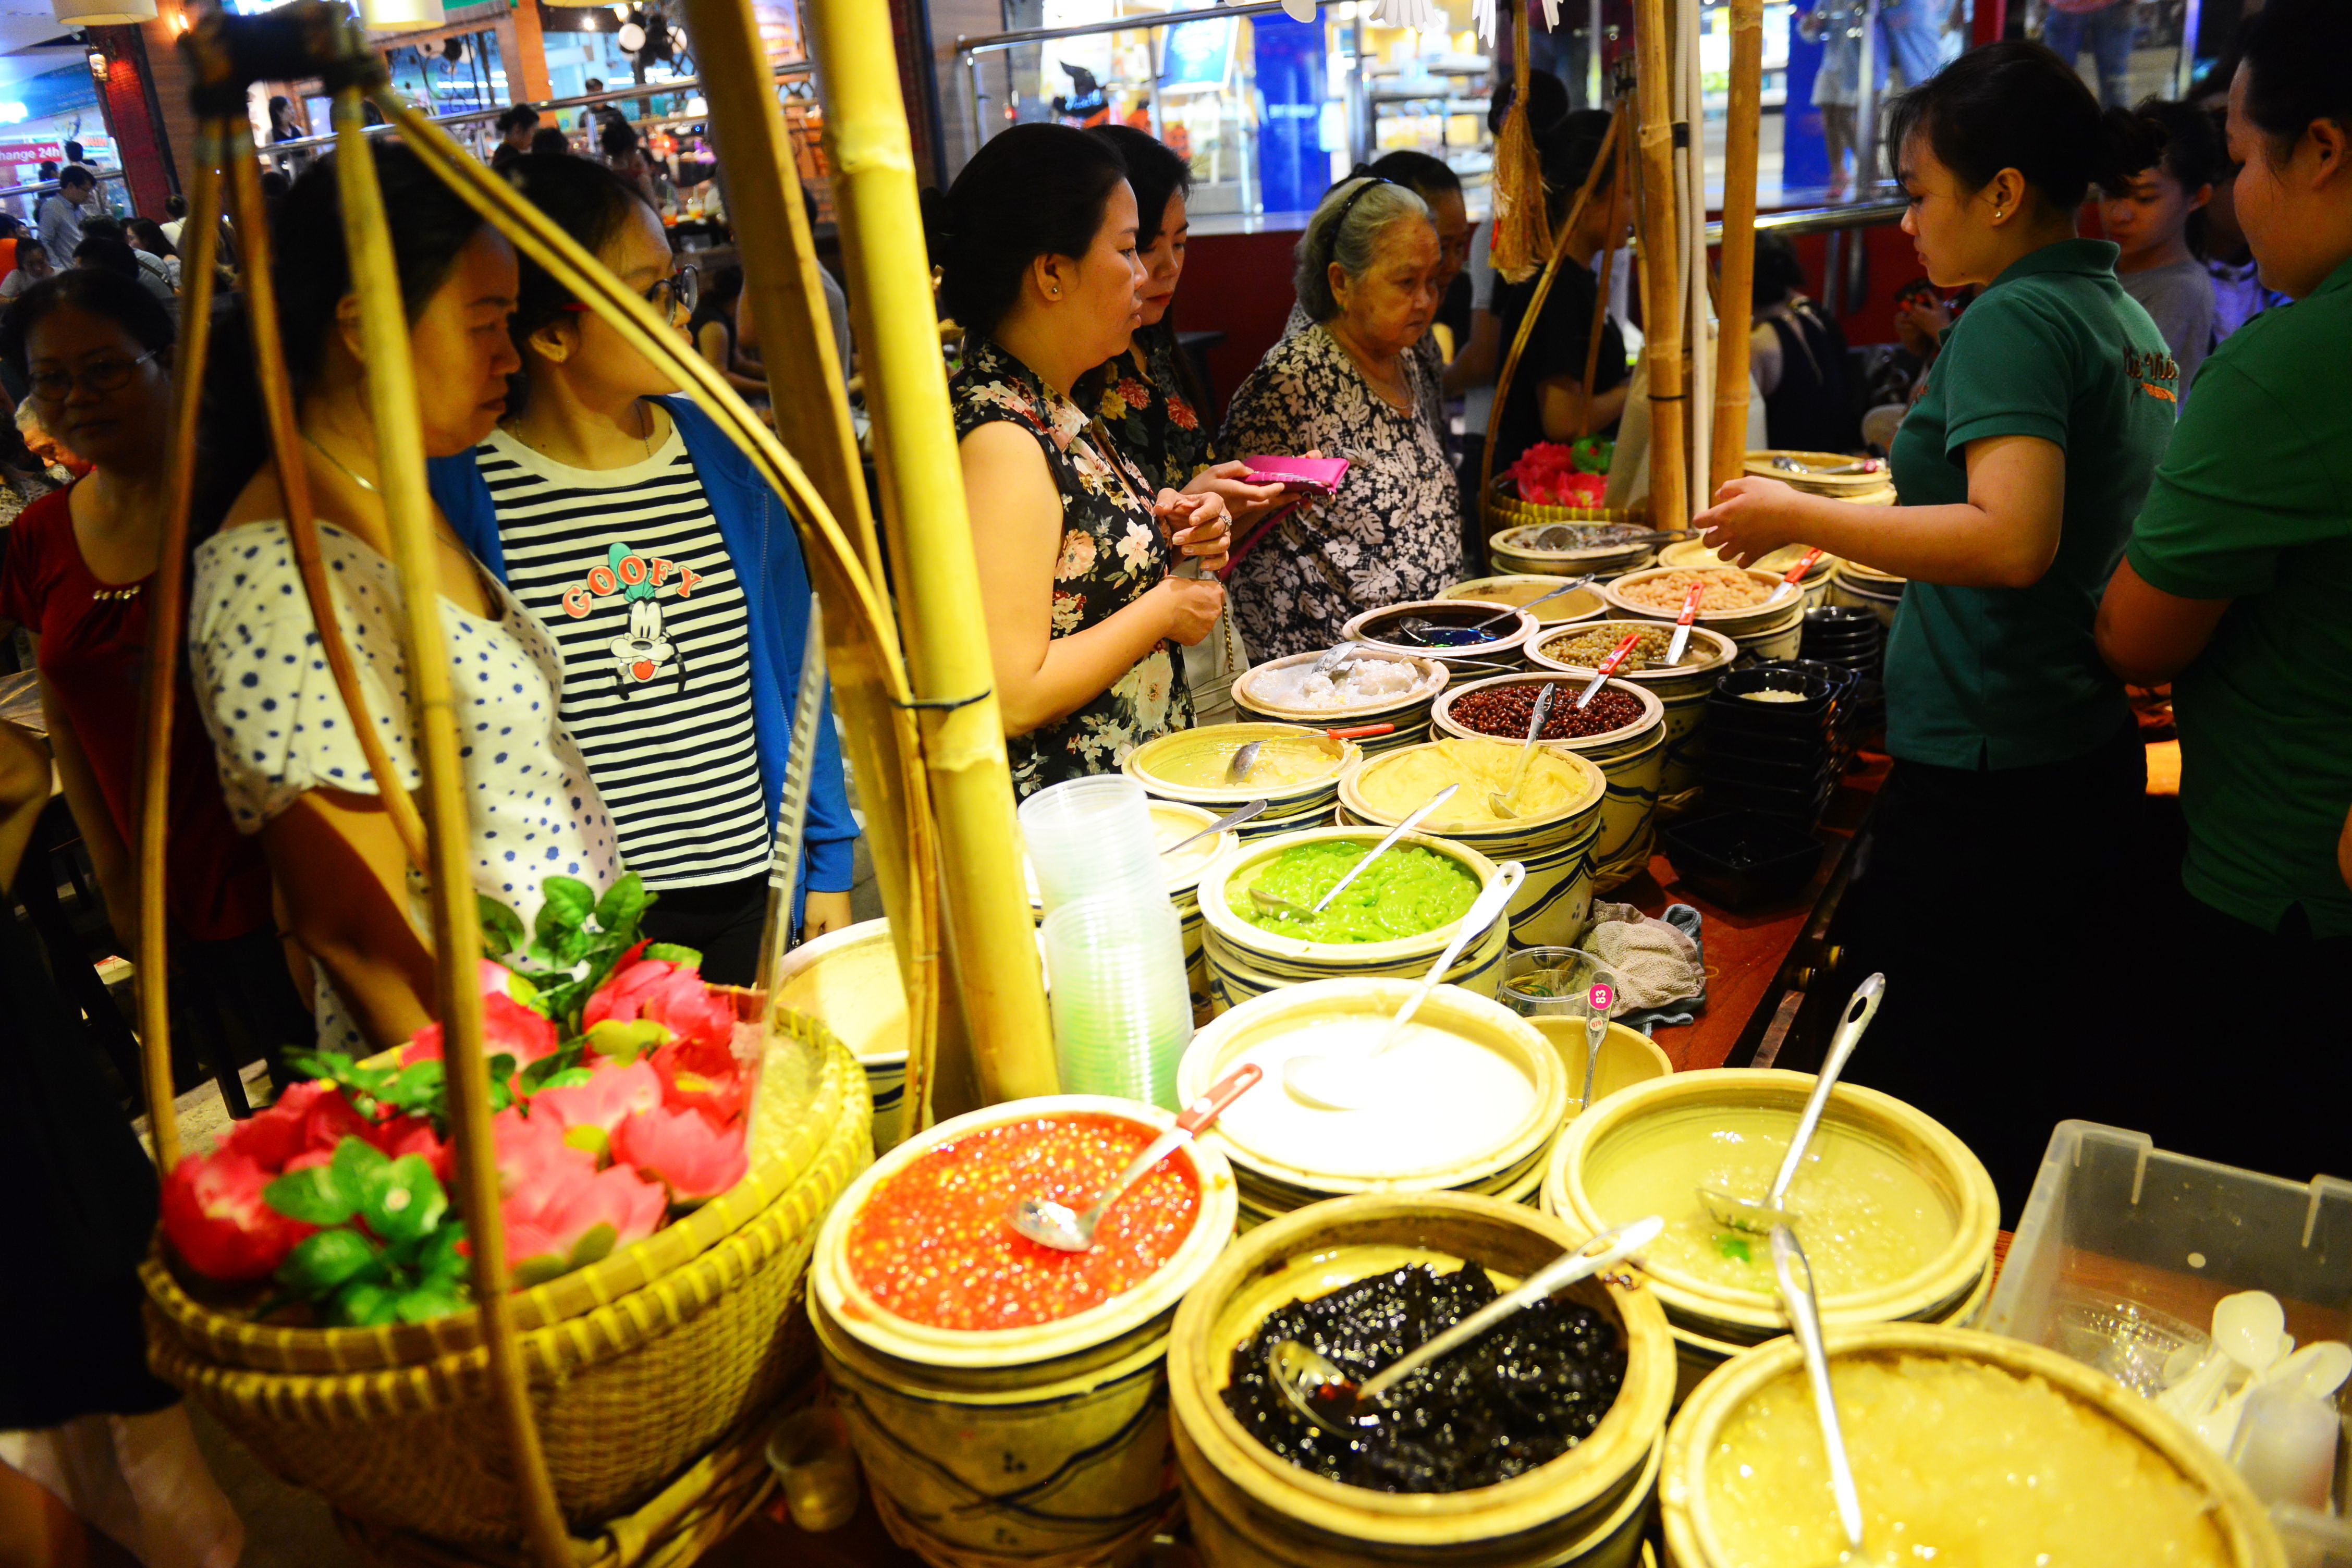 Traditional Vietnamese desert is offered at a food stall.